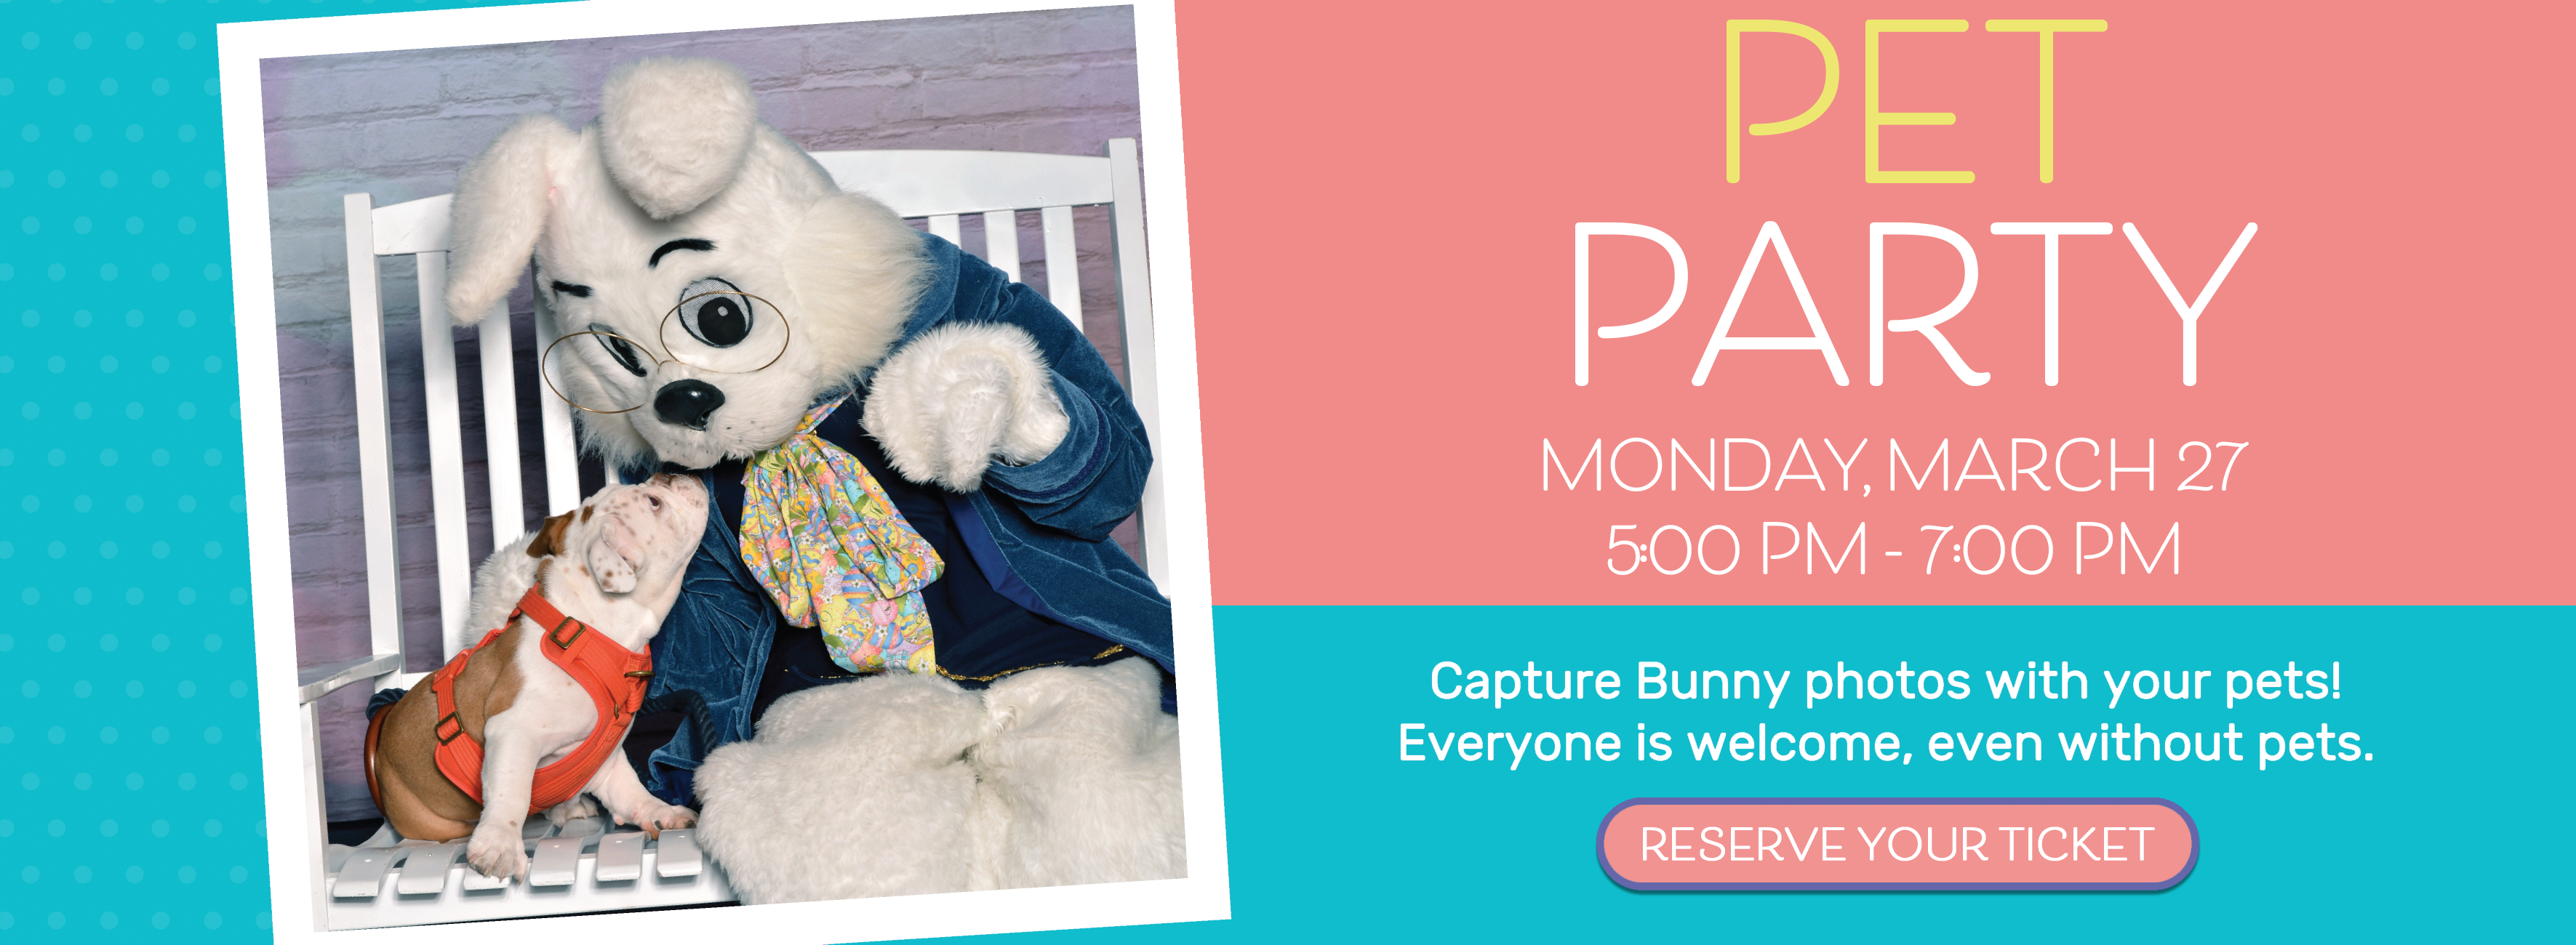 PetParties Facebook Event Cover revised